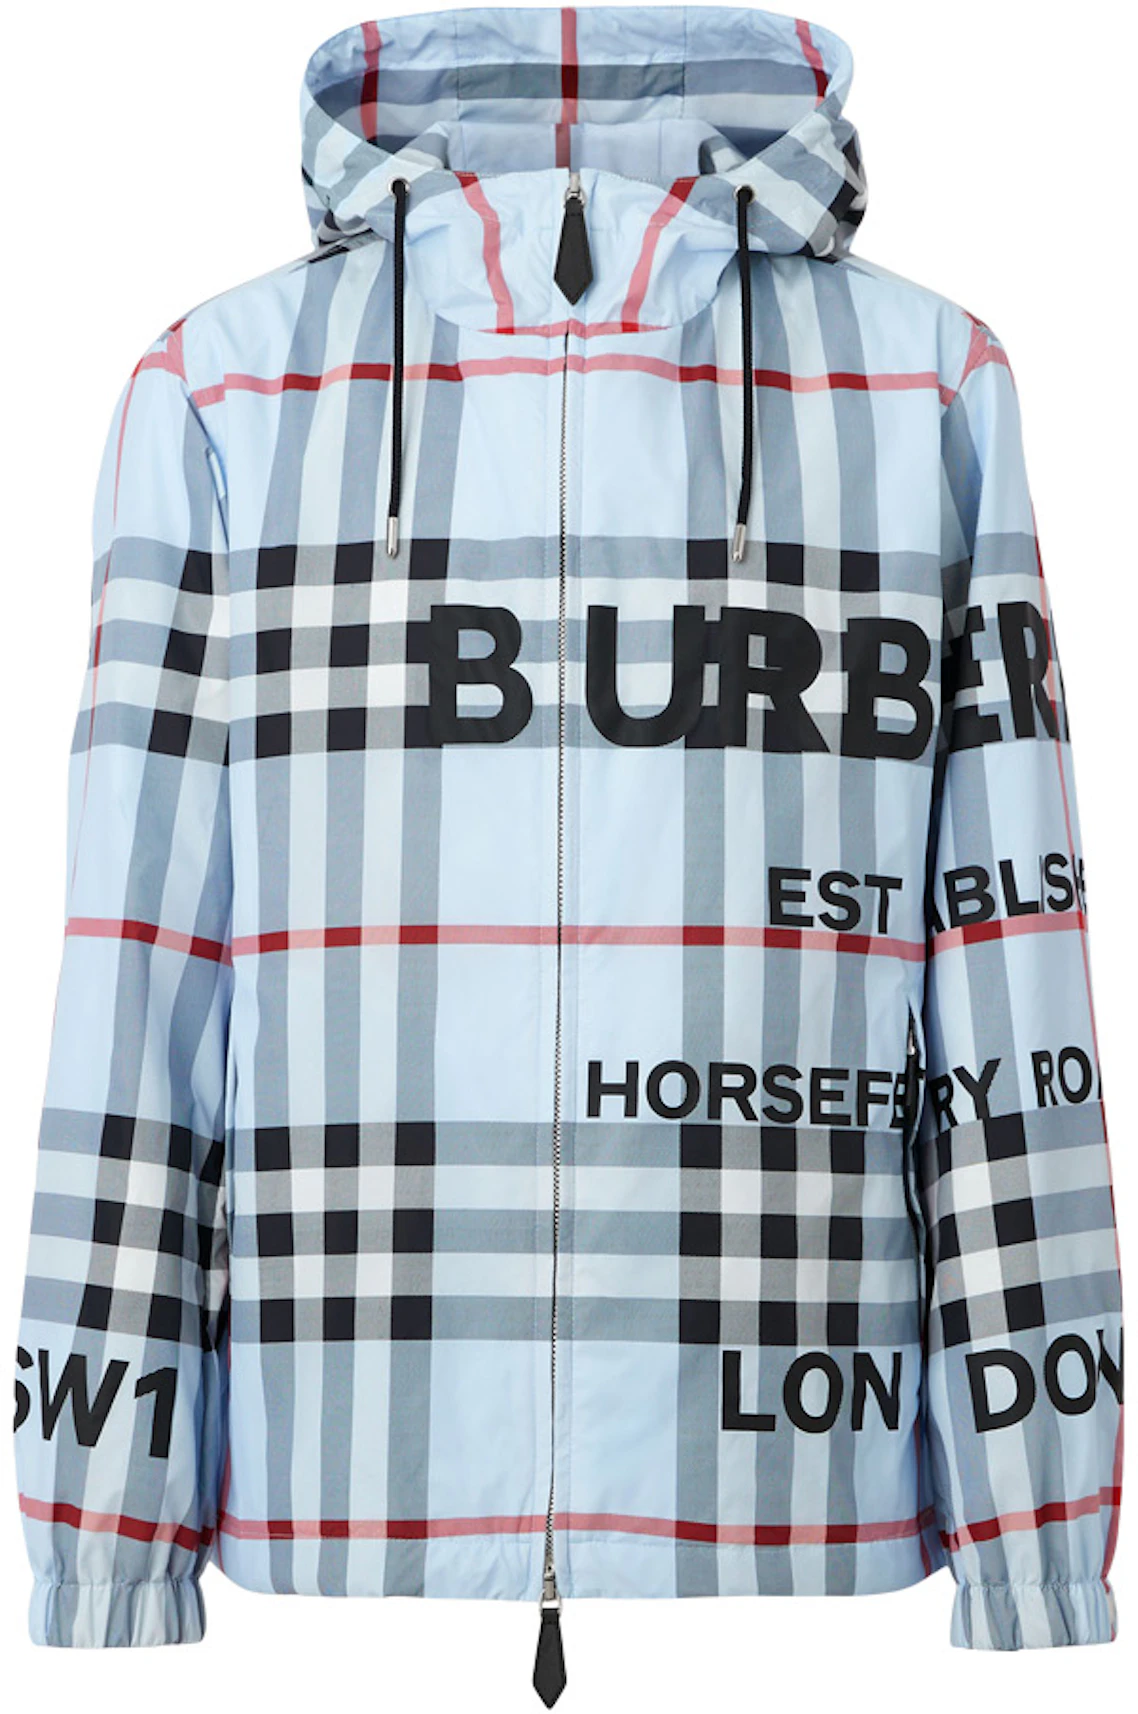 Burberry Horseferry Print Check Nylon Hooded Jacket Pale Blue - US